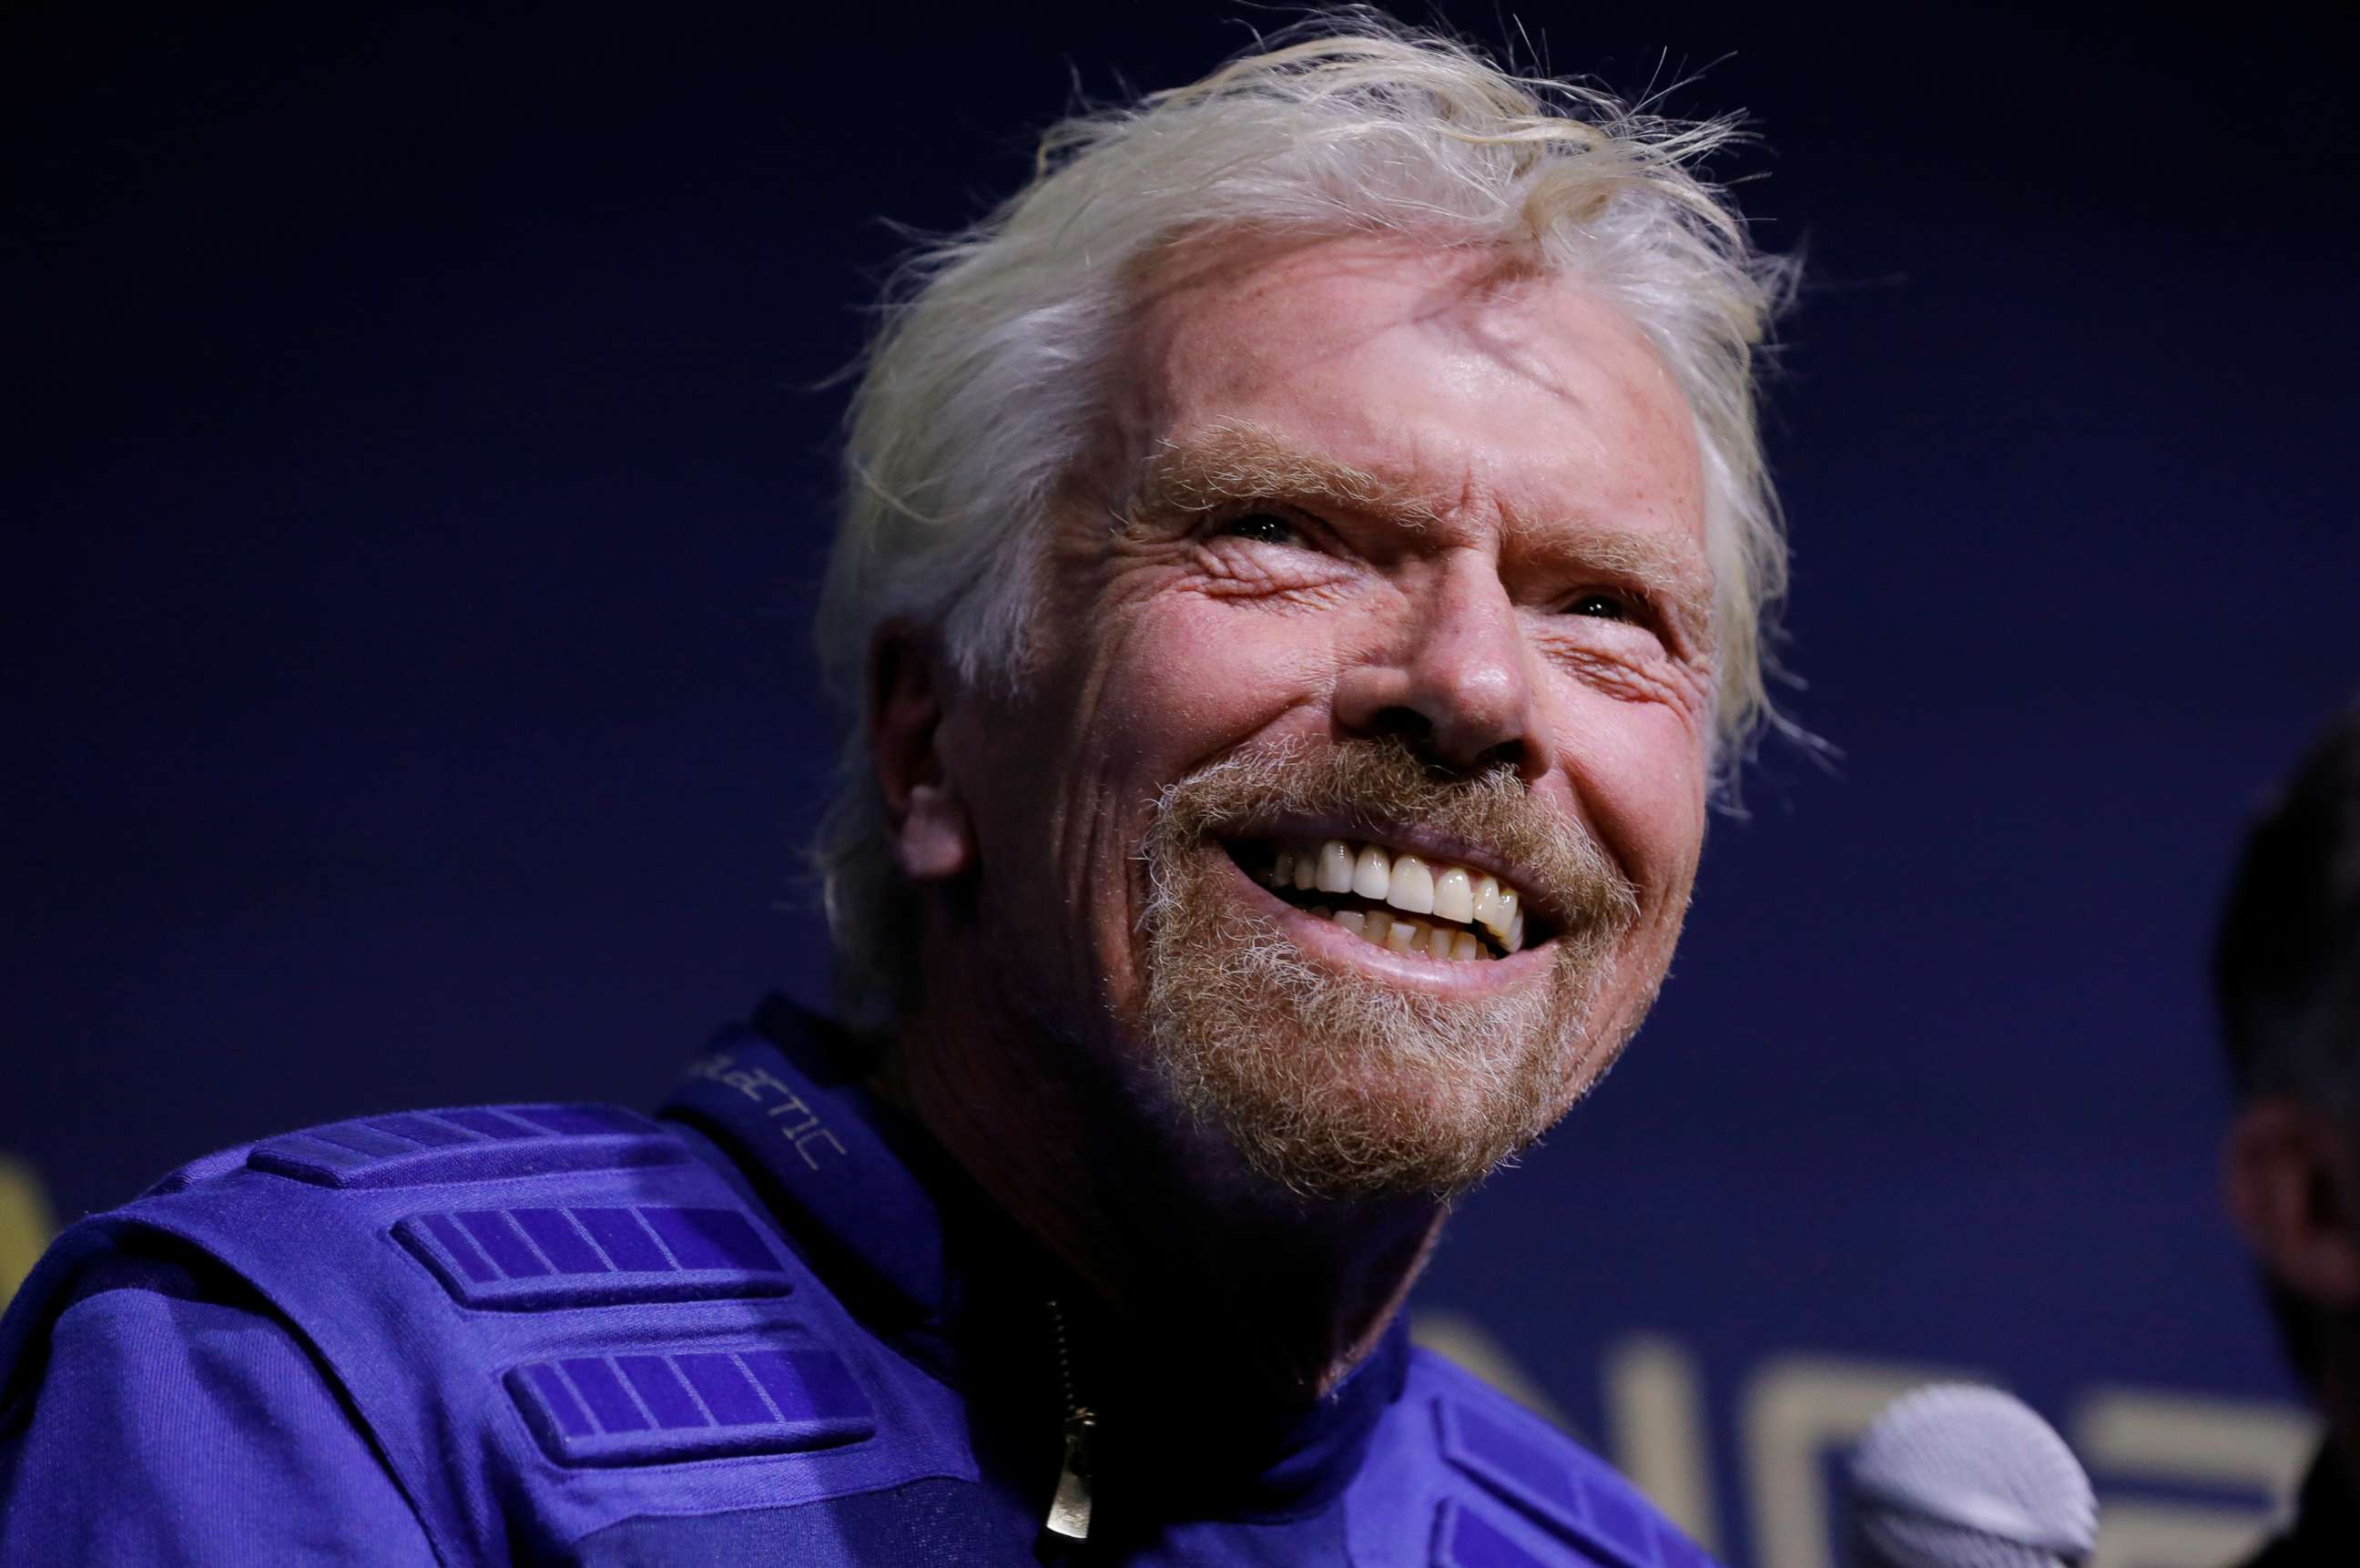 What to know about Richard Branson's spaceflight, as billionaires